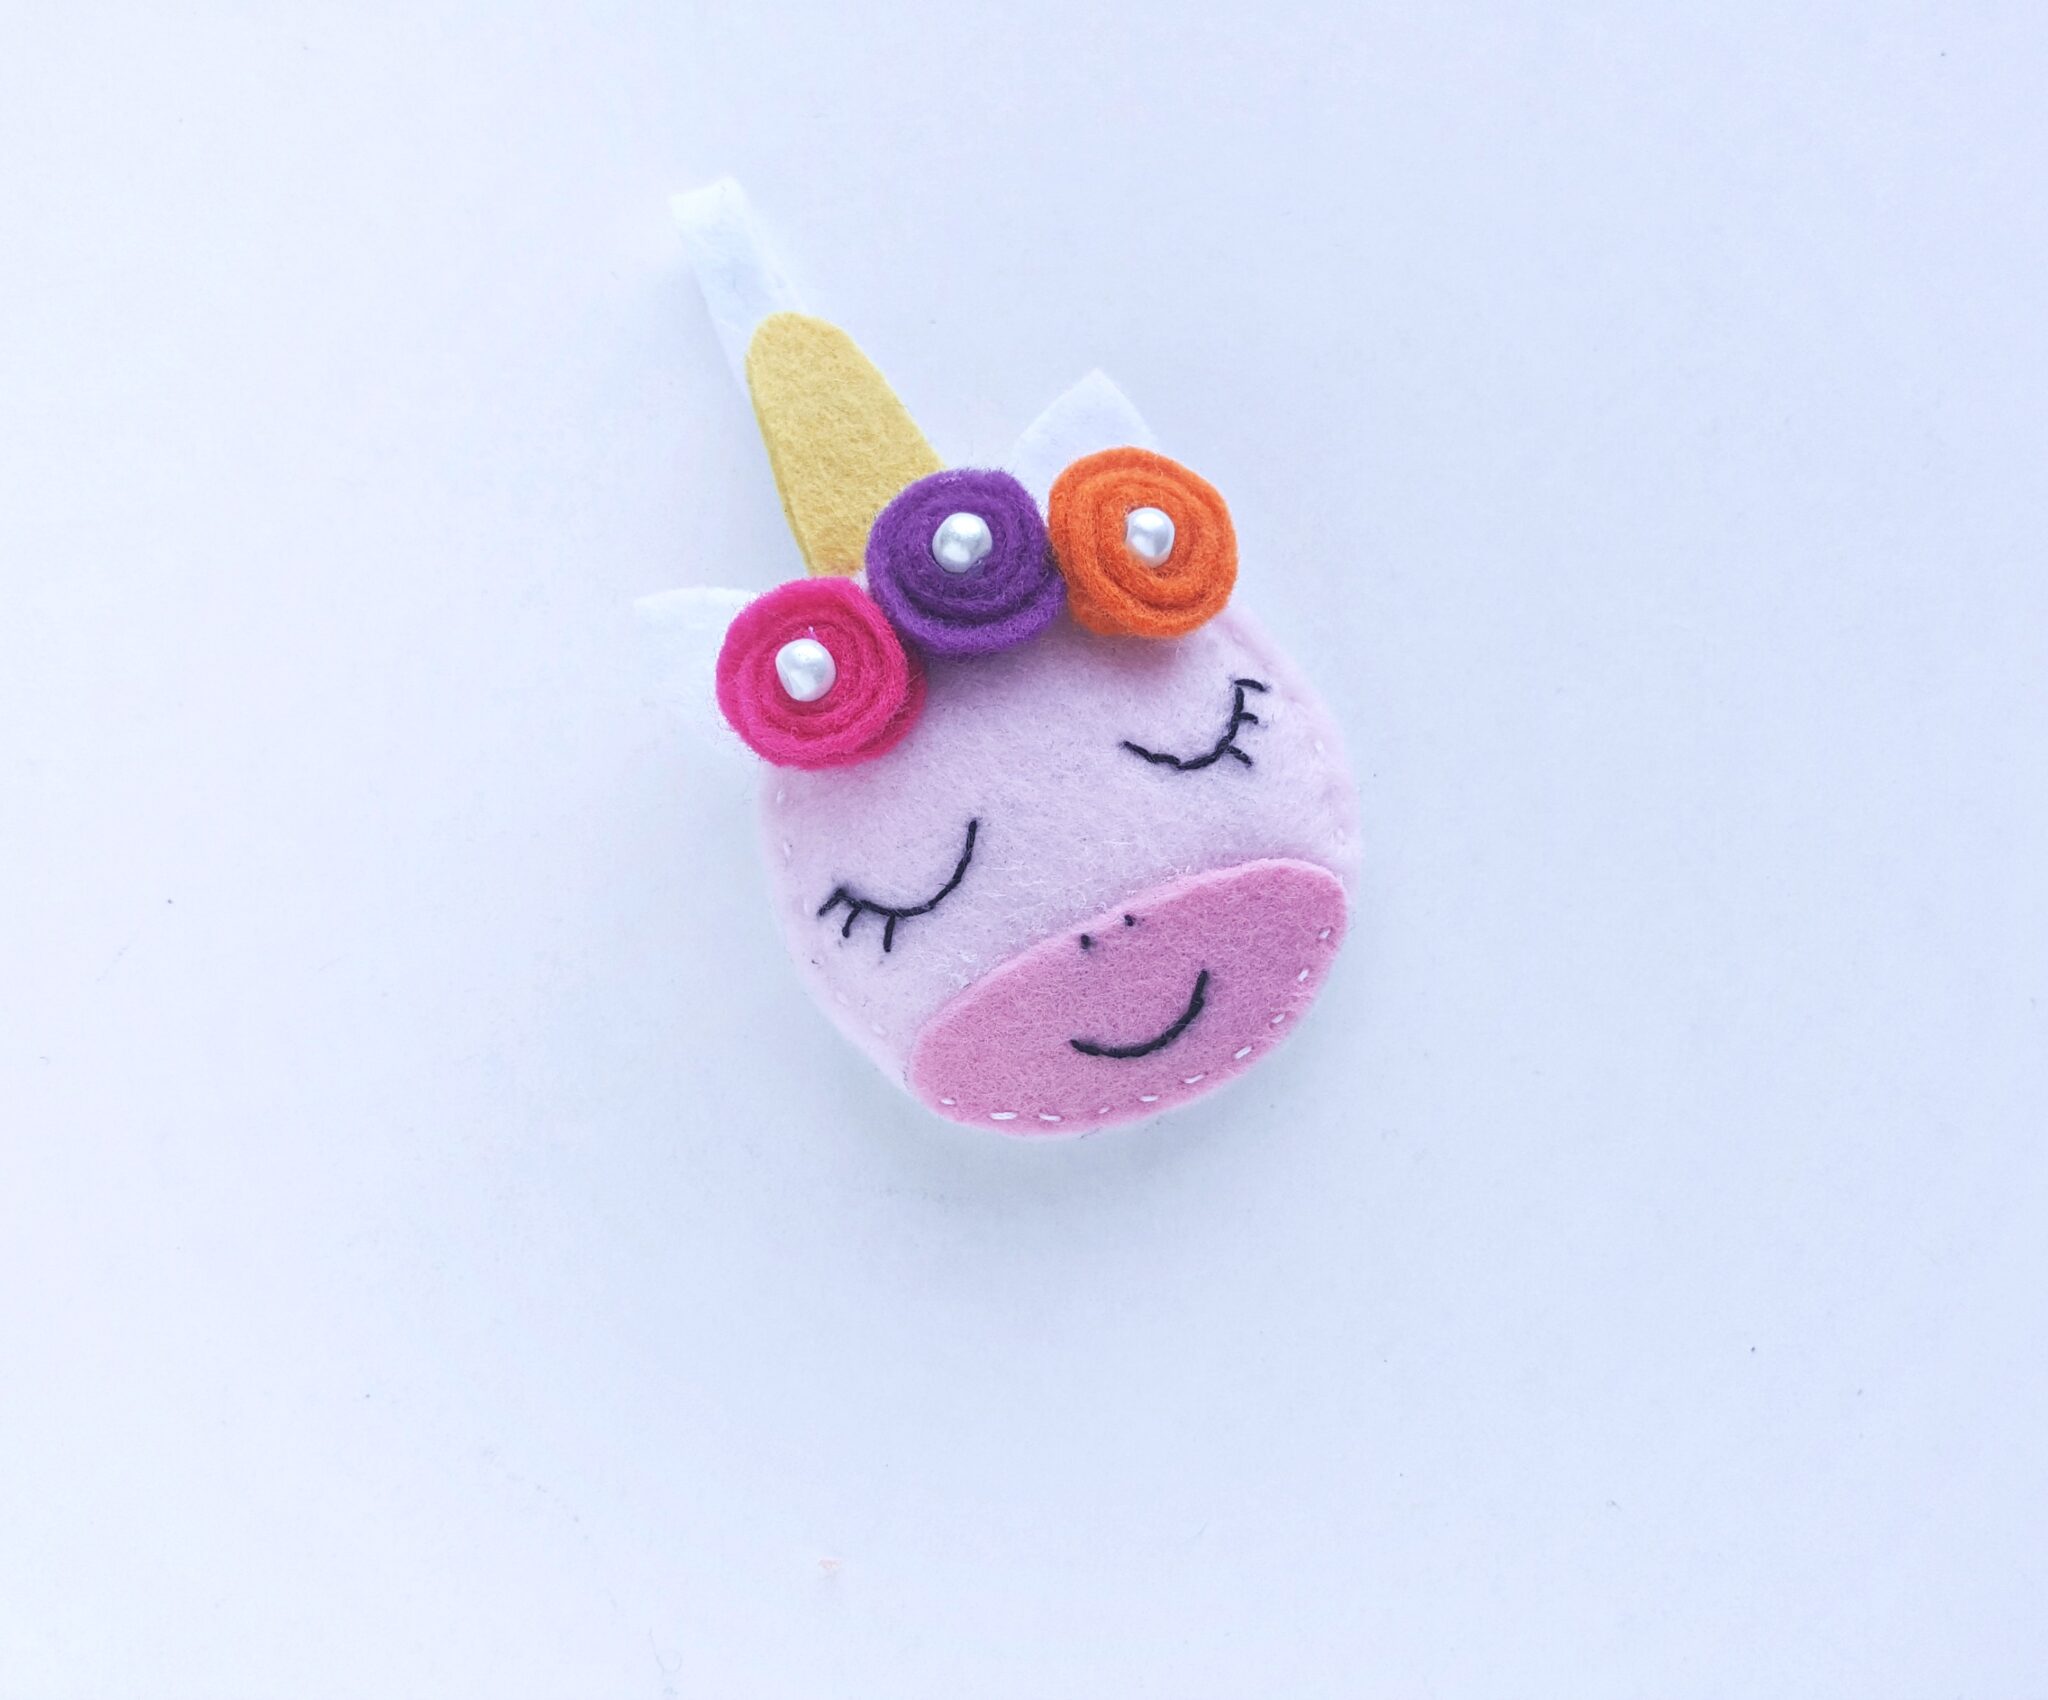 Little pearls were added to the floral crown on top of the felt unicorn's head.